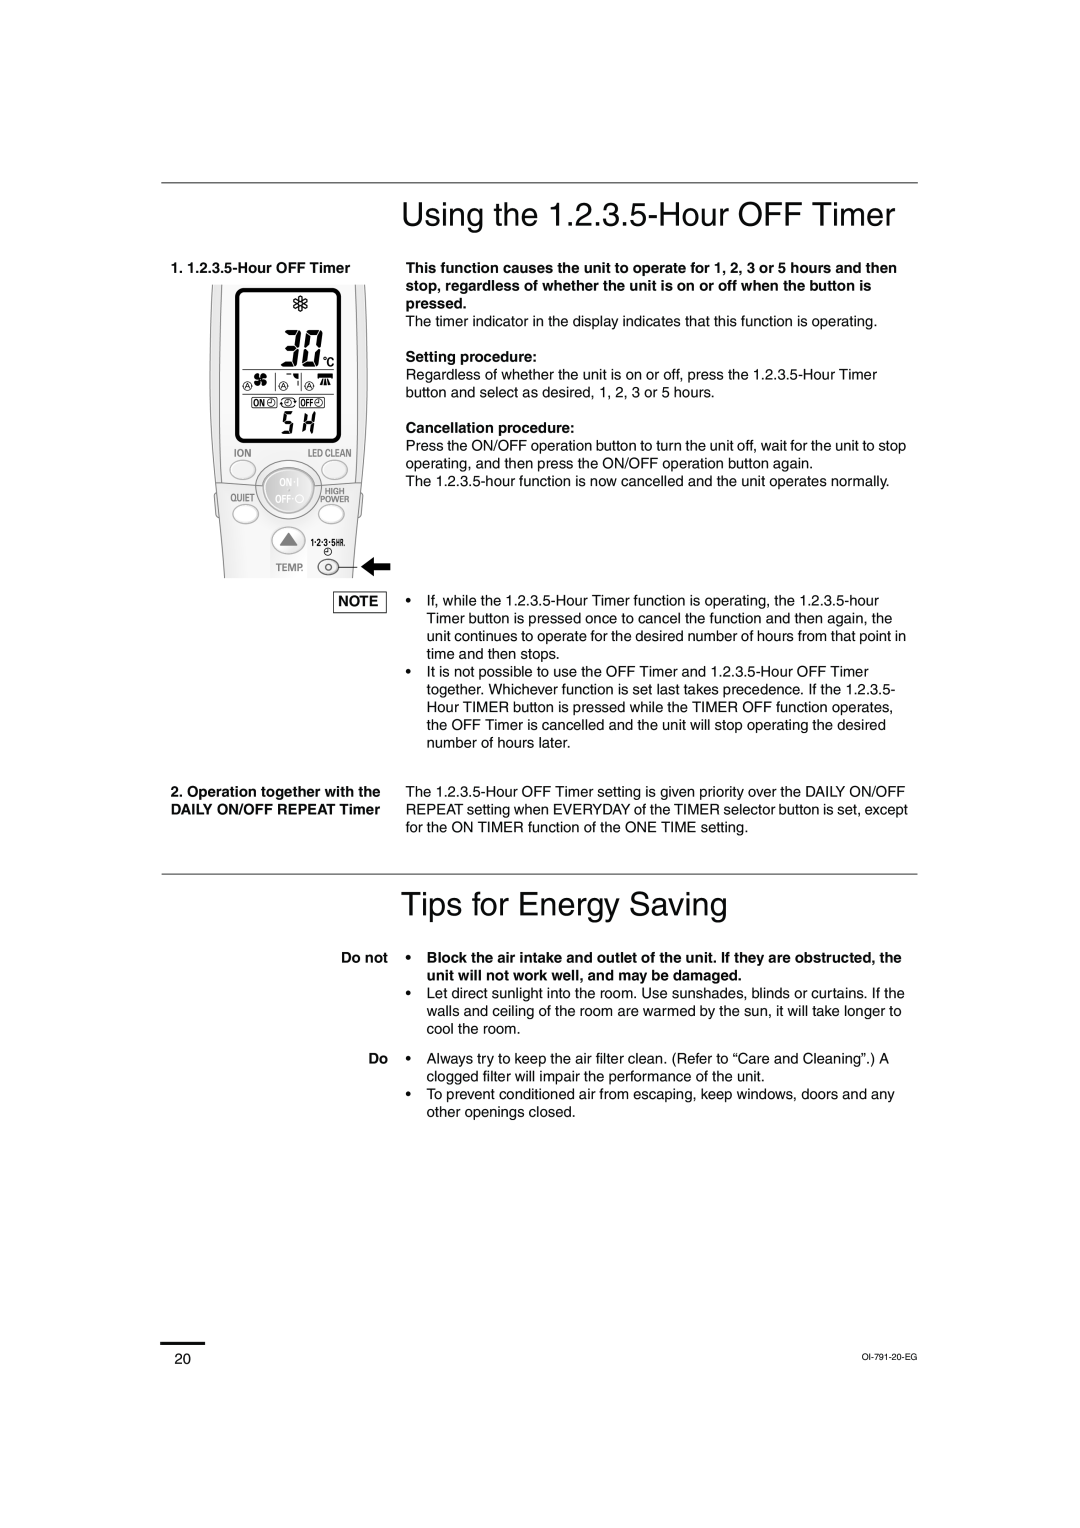 Sanyo SAP-KRV94EHDX service manual Using the 1.2.3.5-HourOFF Timer, Tips for Energy Saving 